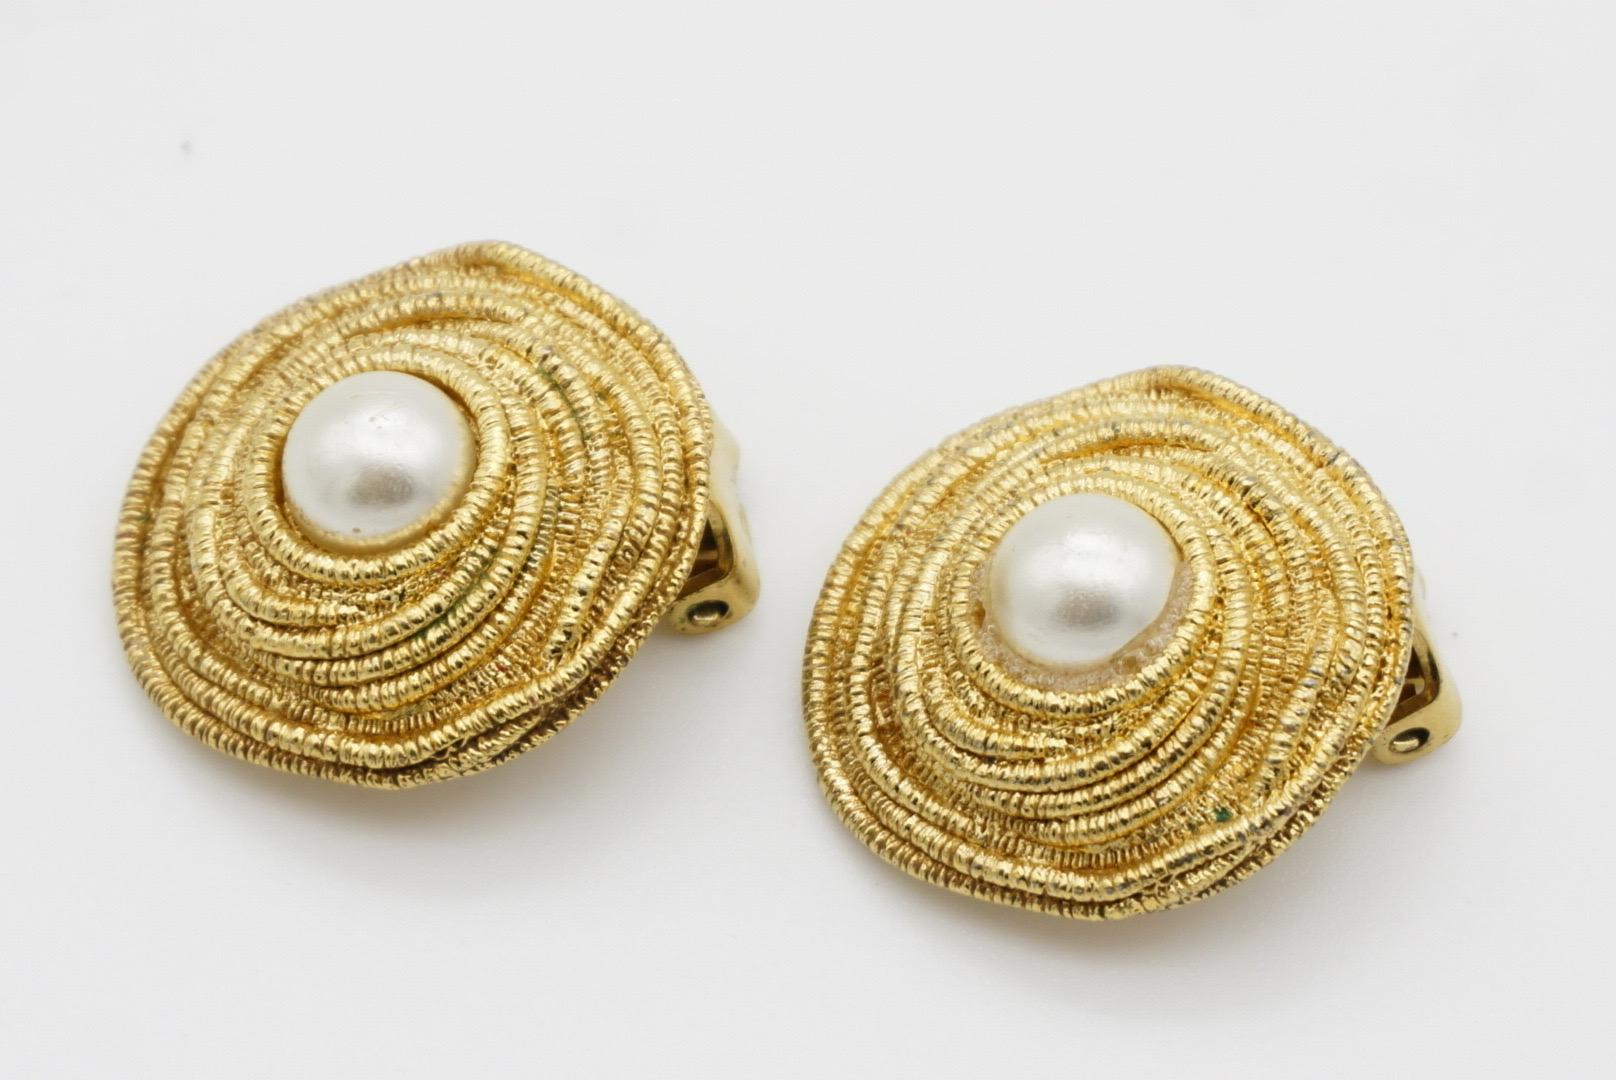 Christian Dior Vintage 1980s Irregular Spiral Round Circle Pearl Clip Earrings For Sale 7